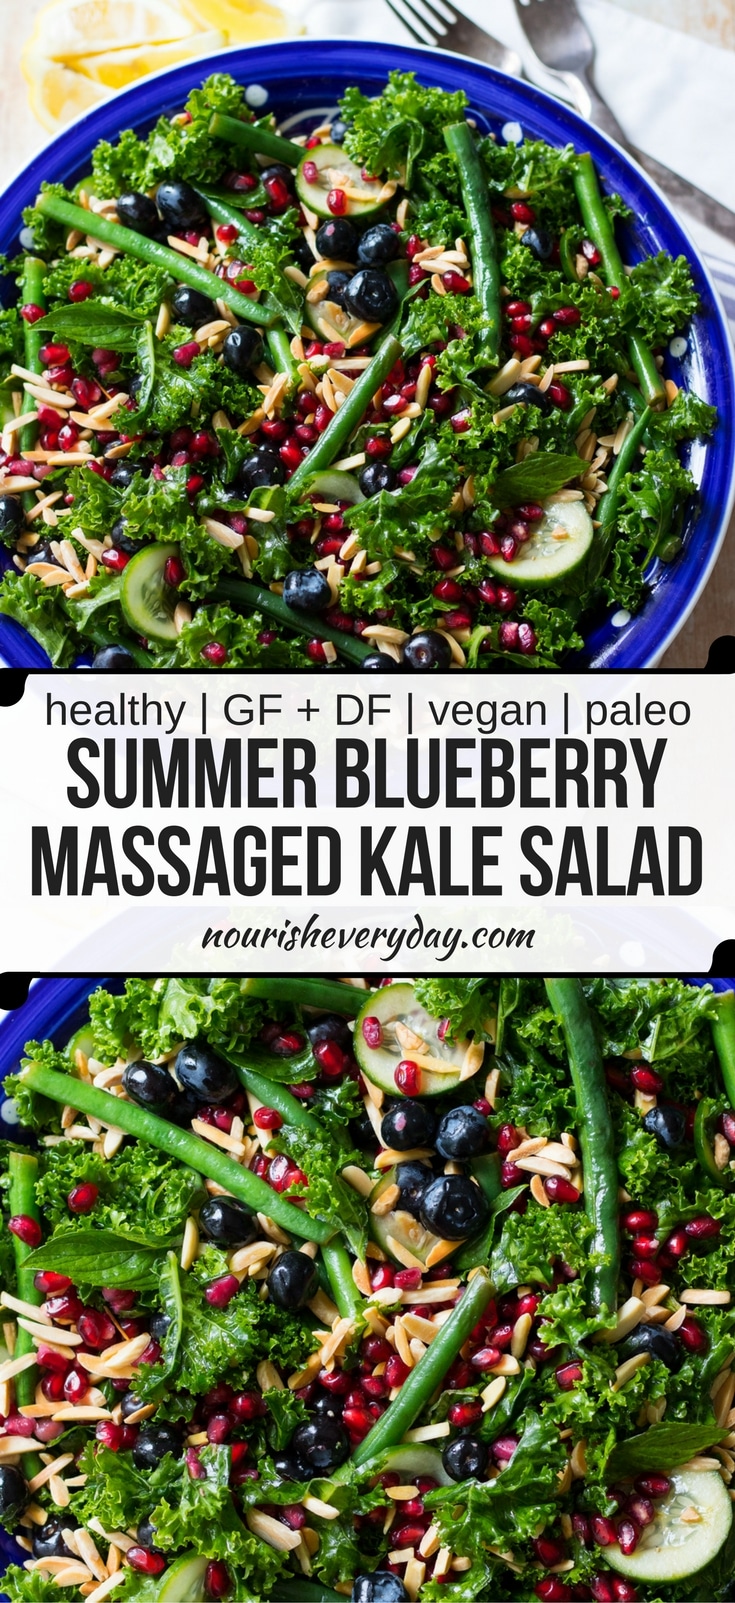 A summery blueberry kale salad filled with #healthy greens, blueberries, mint, pomegranate and crunchy toasted almonds. Perfect for sharing at a BBQ! Gluten free, dairy free, grain free and paleo. #kalesalad #paleo #saladideas